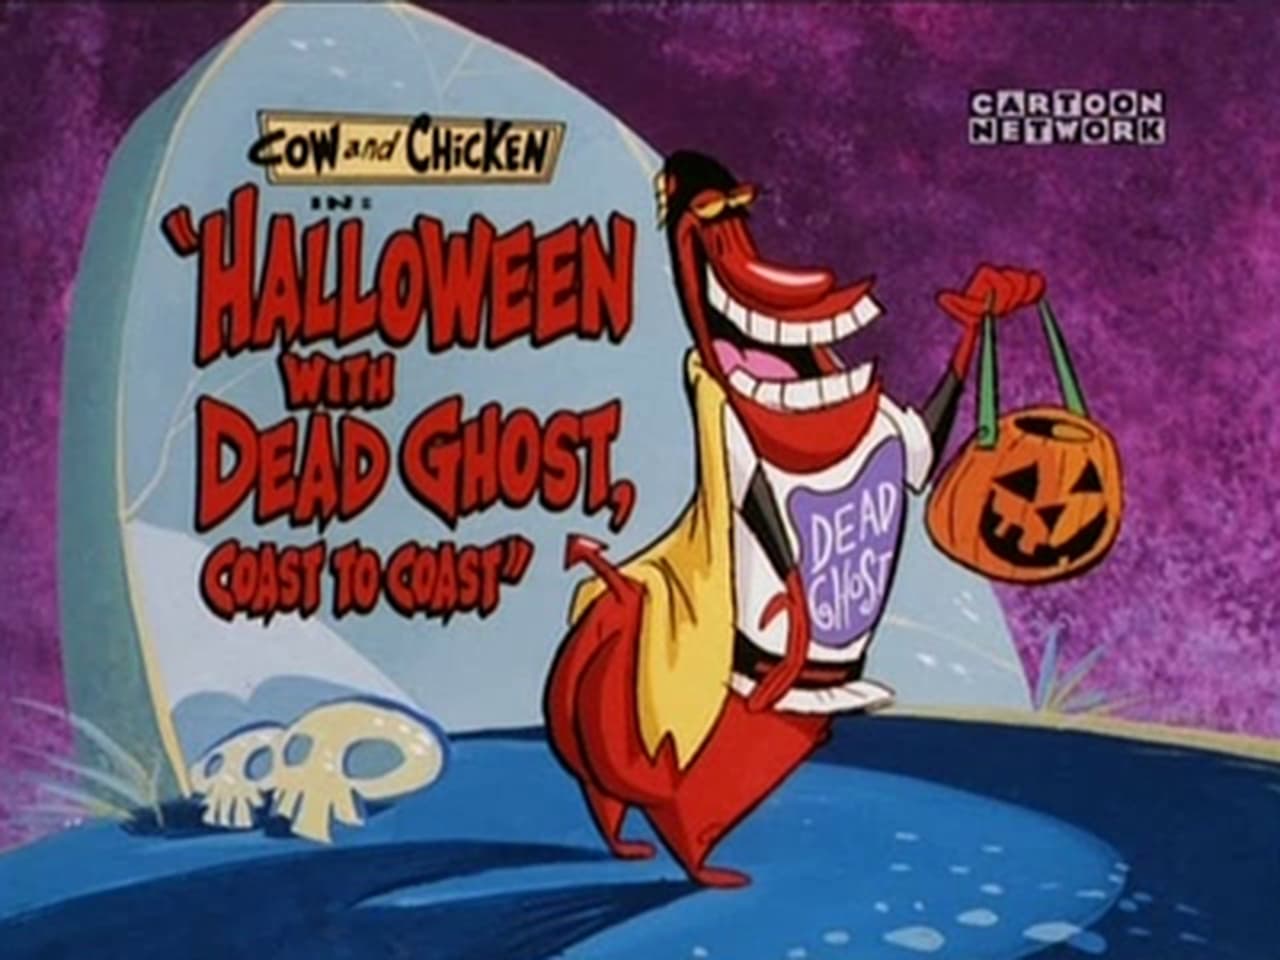 Cow and Chicken - Season 2 Episode 4 : Halloween with Dead Ghost, Coast to Coast